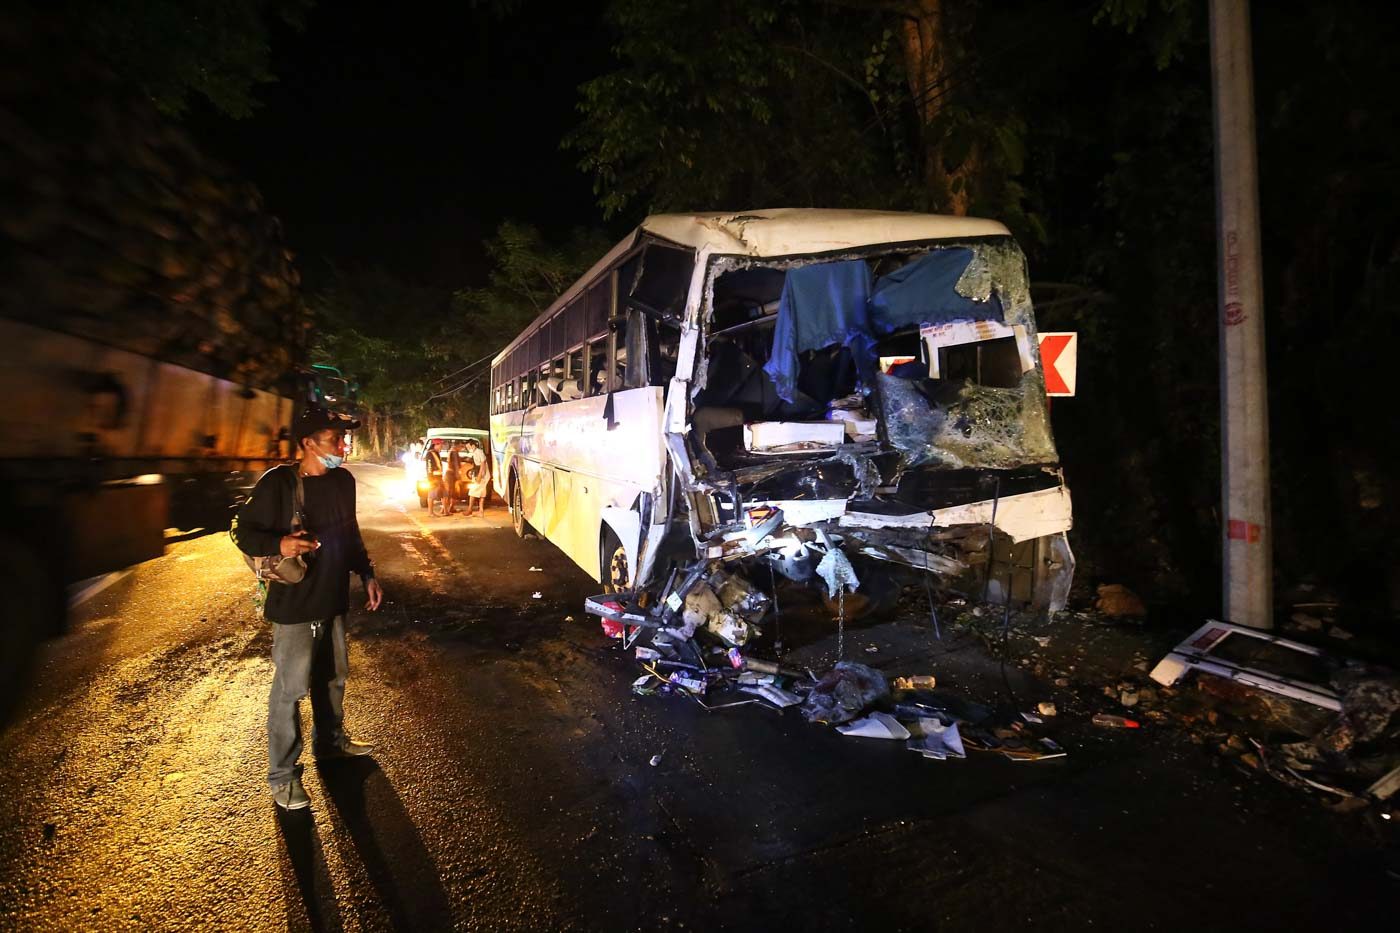 SMASHED. A bus passenger was killed following the head-on collision of this bus with a cargo truck in Atinominan, Quezon, on May 6, 2019. Photo by Ben Nabong/Rappler 